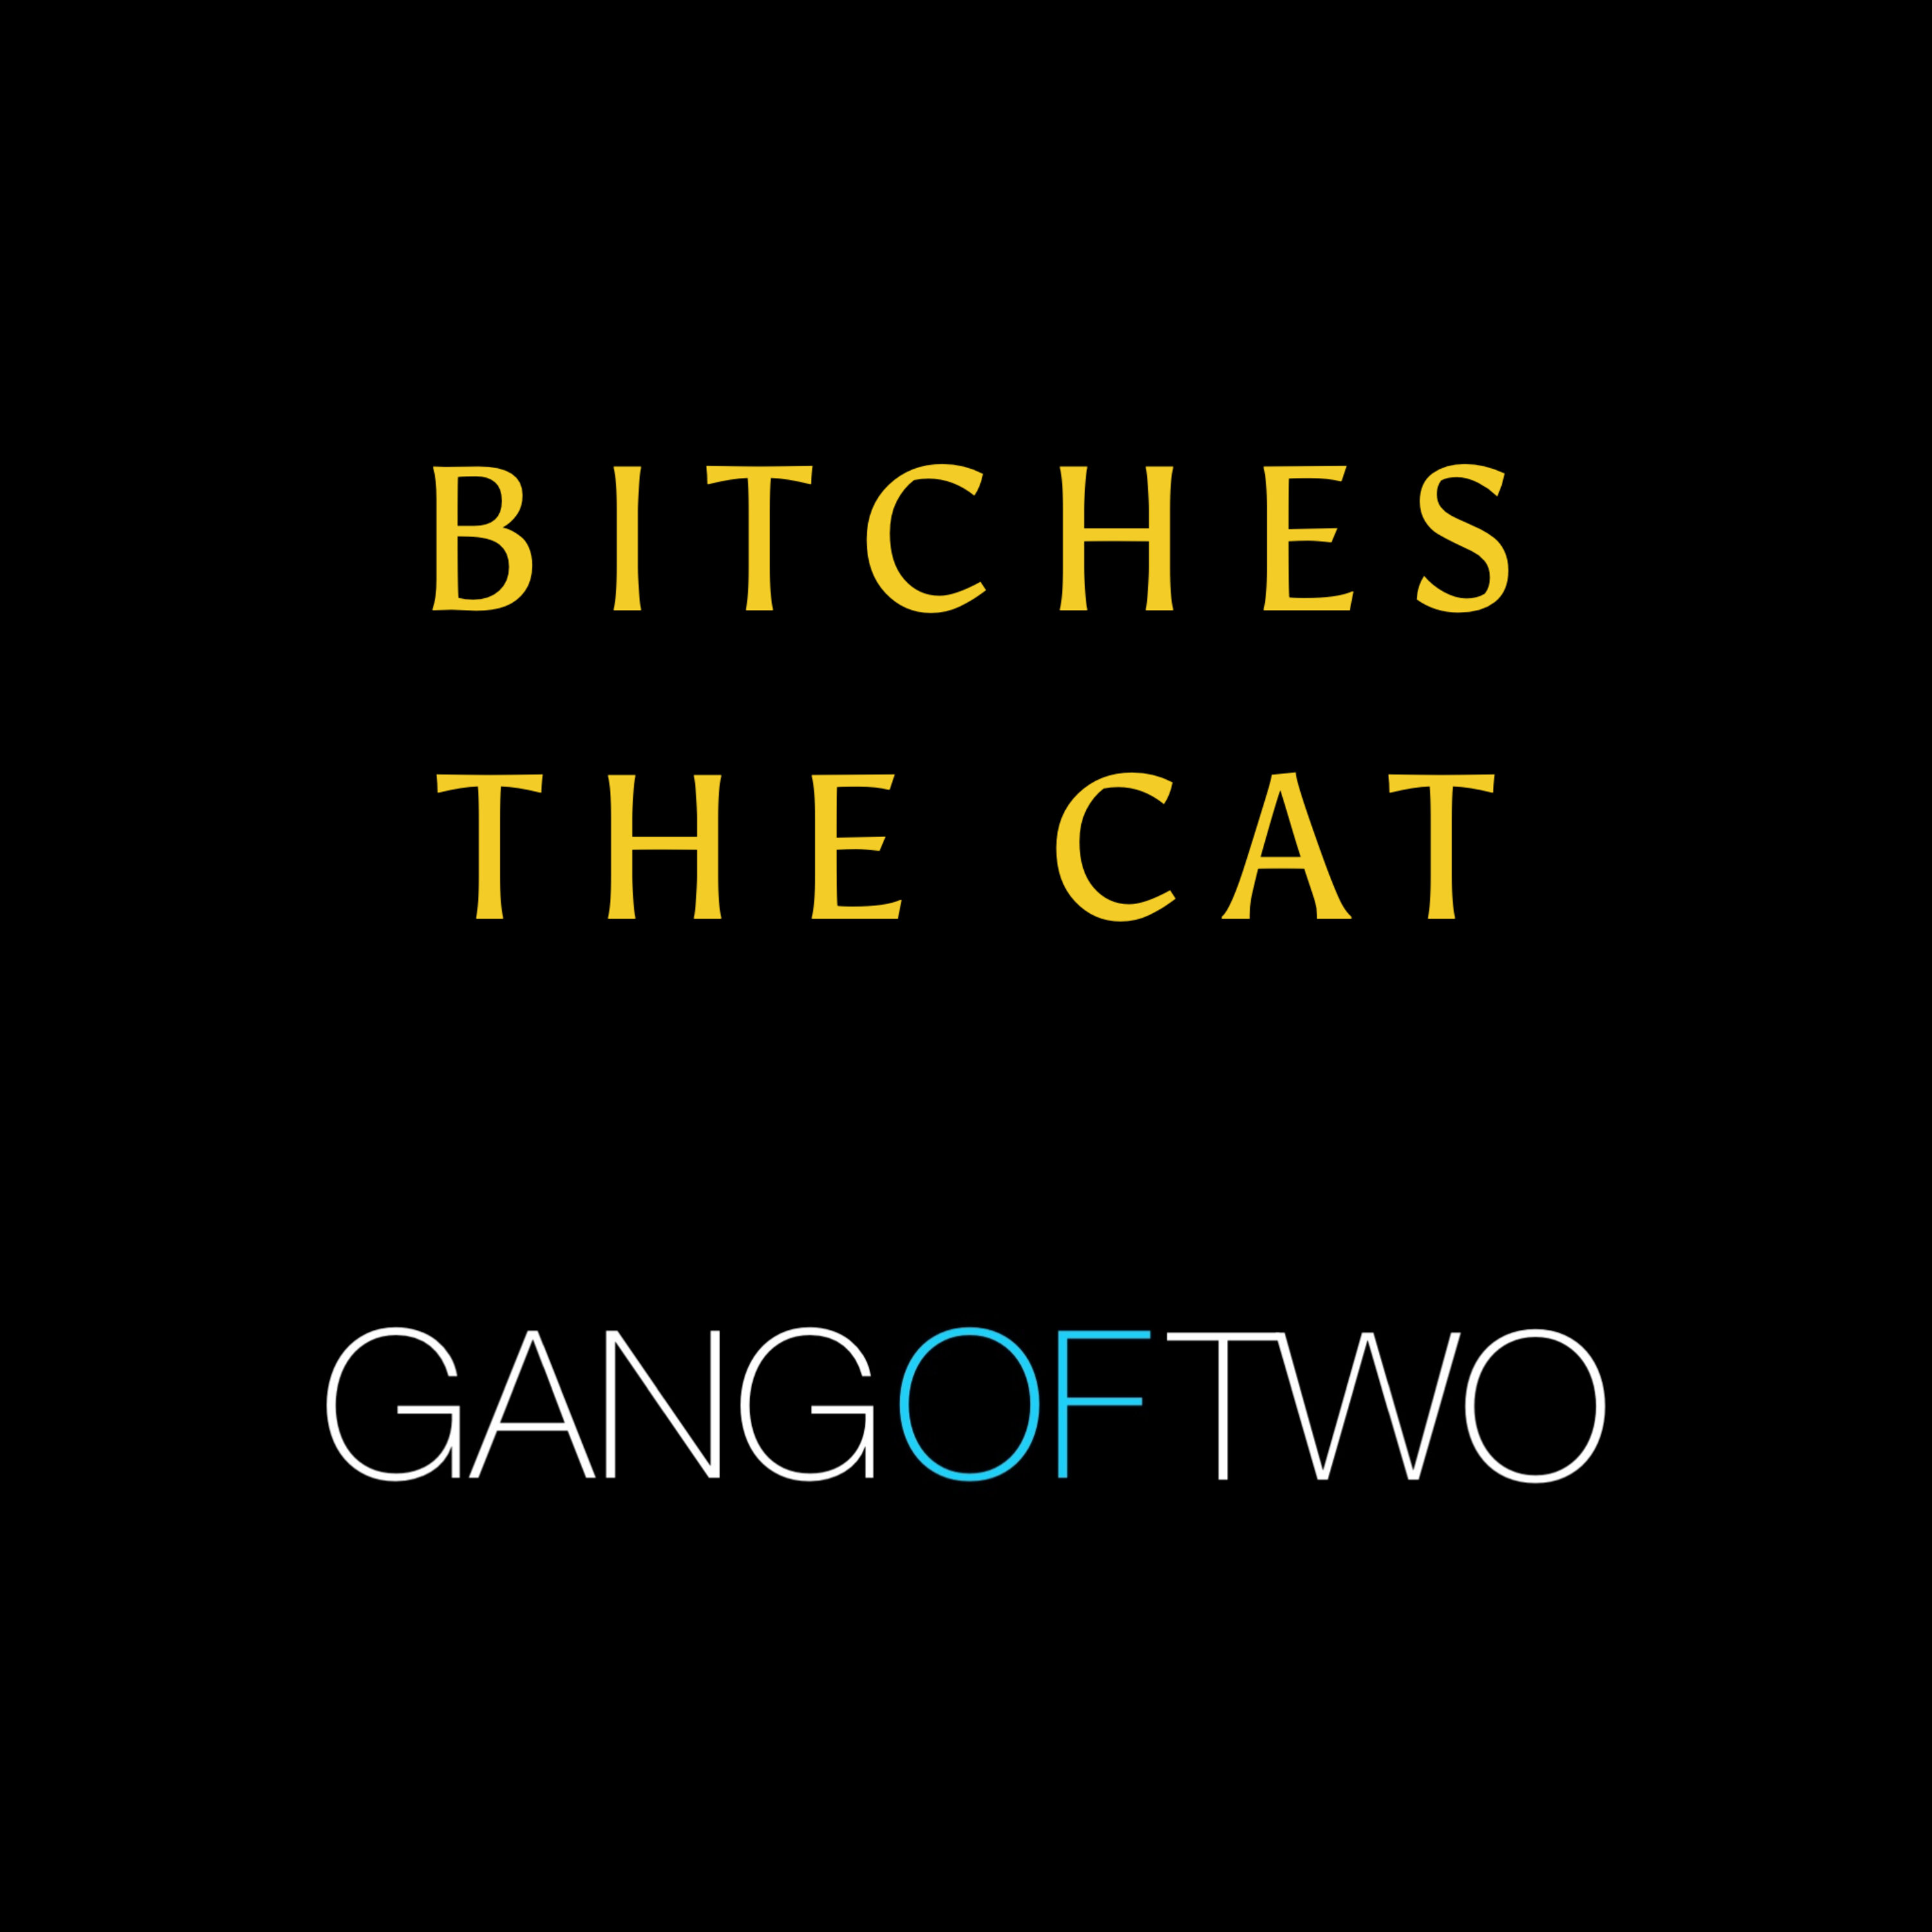 BITCHES THE CAT